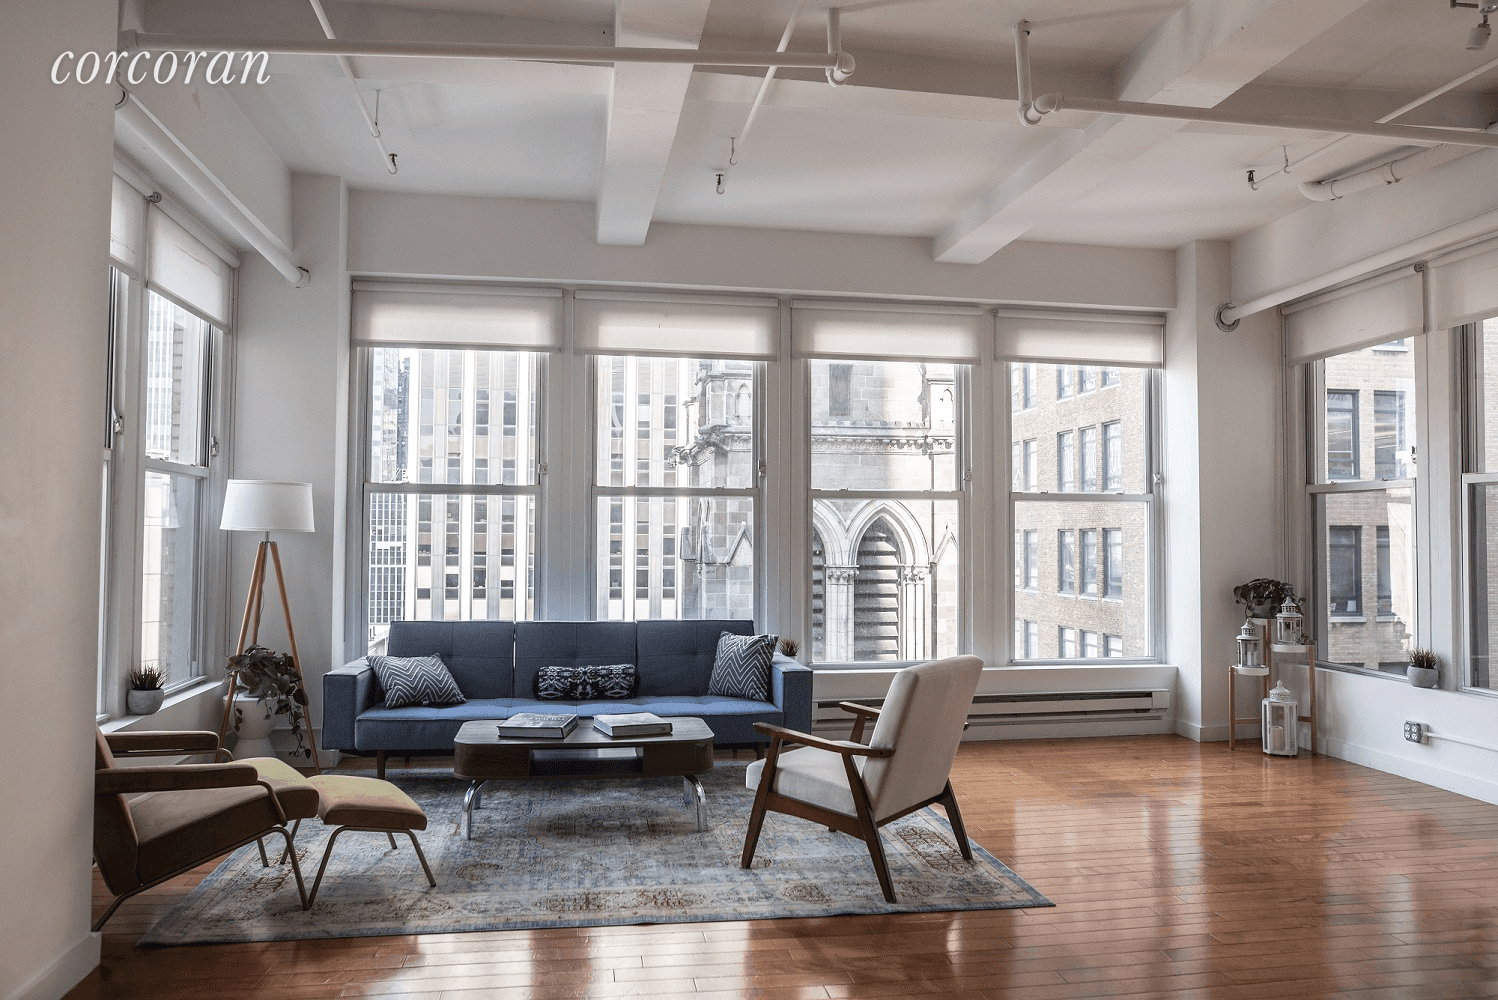 This massive Chelsea Live Work Loft, is on the 10th floor with north facing views, high ceilings and gets tons of natural light.